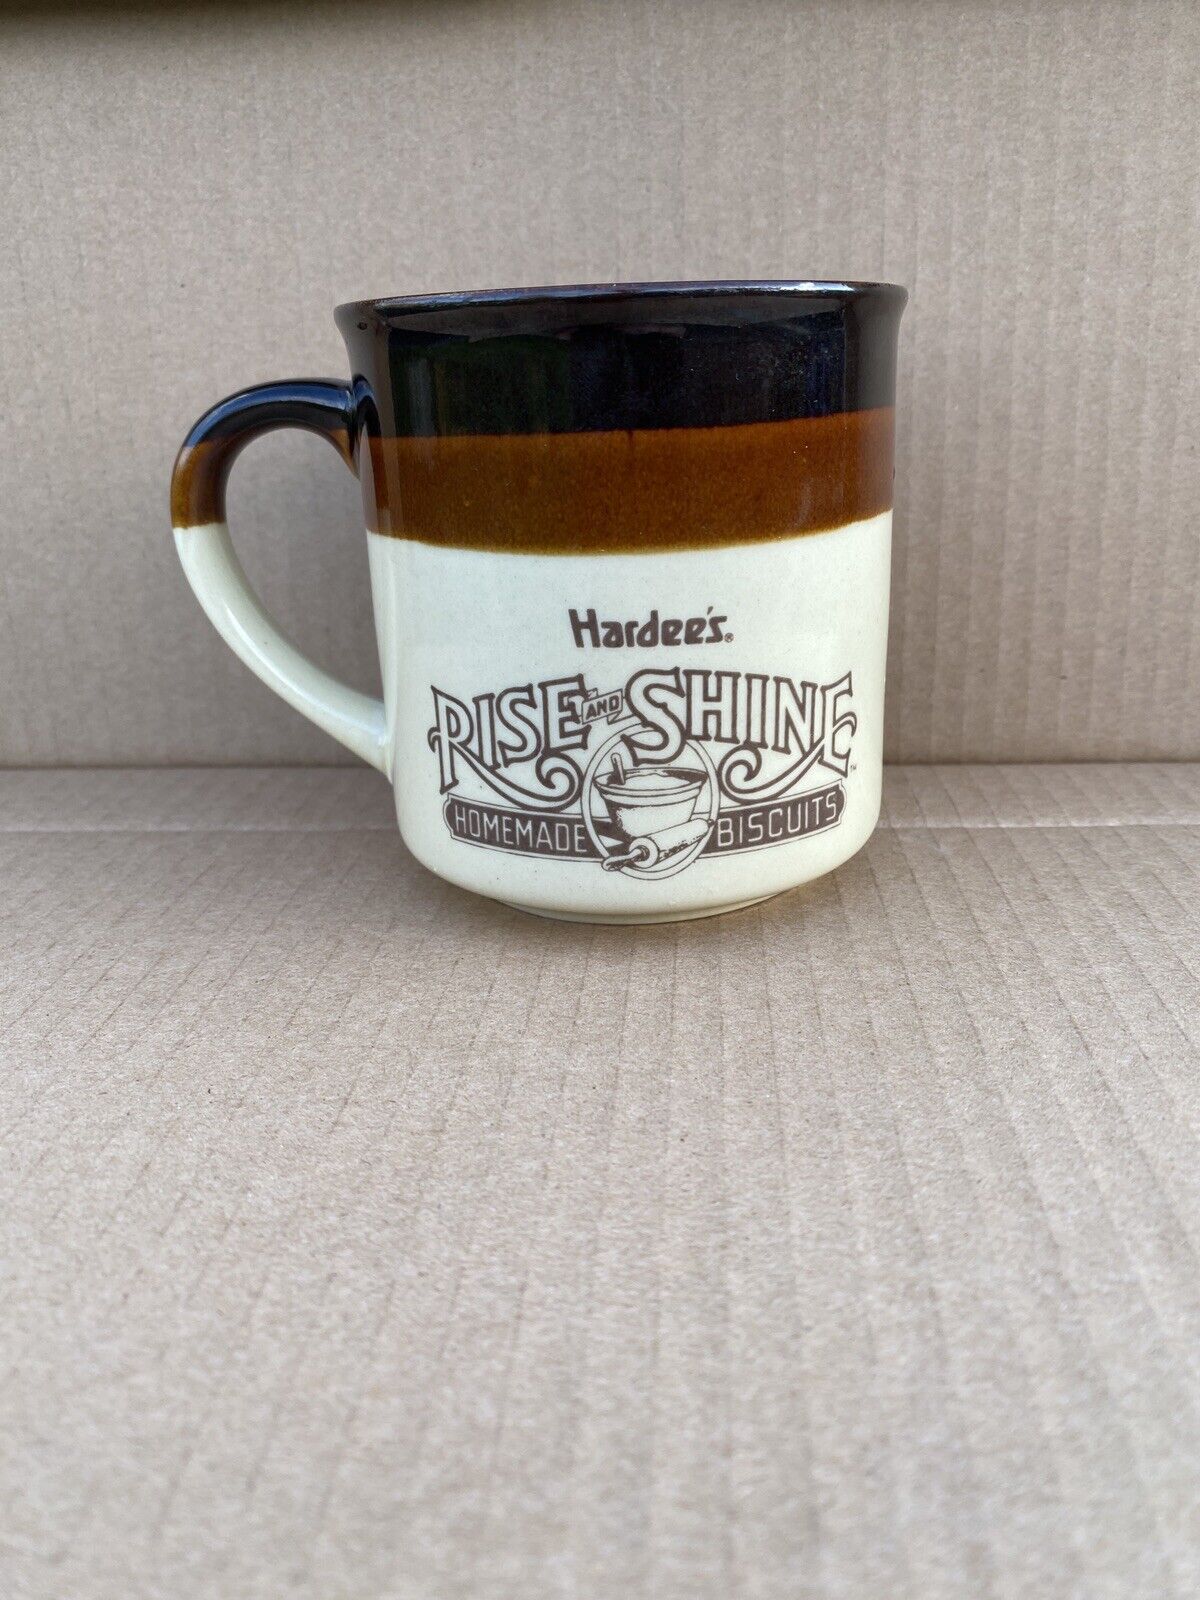 Hardee’s Vintage Coffee Cup Mug Dated 1989 Rise and Shine Homemade Biscuits